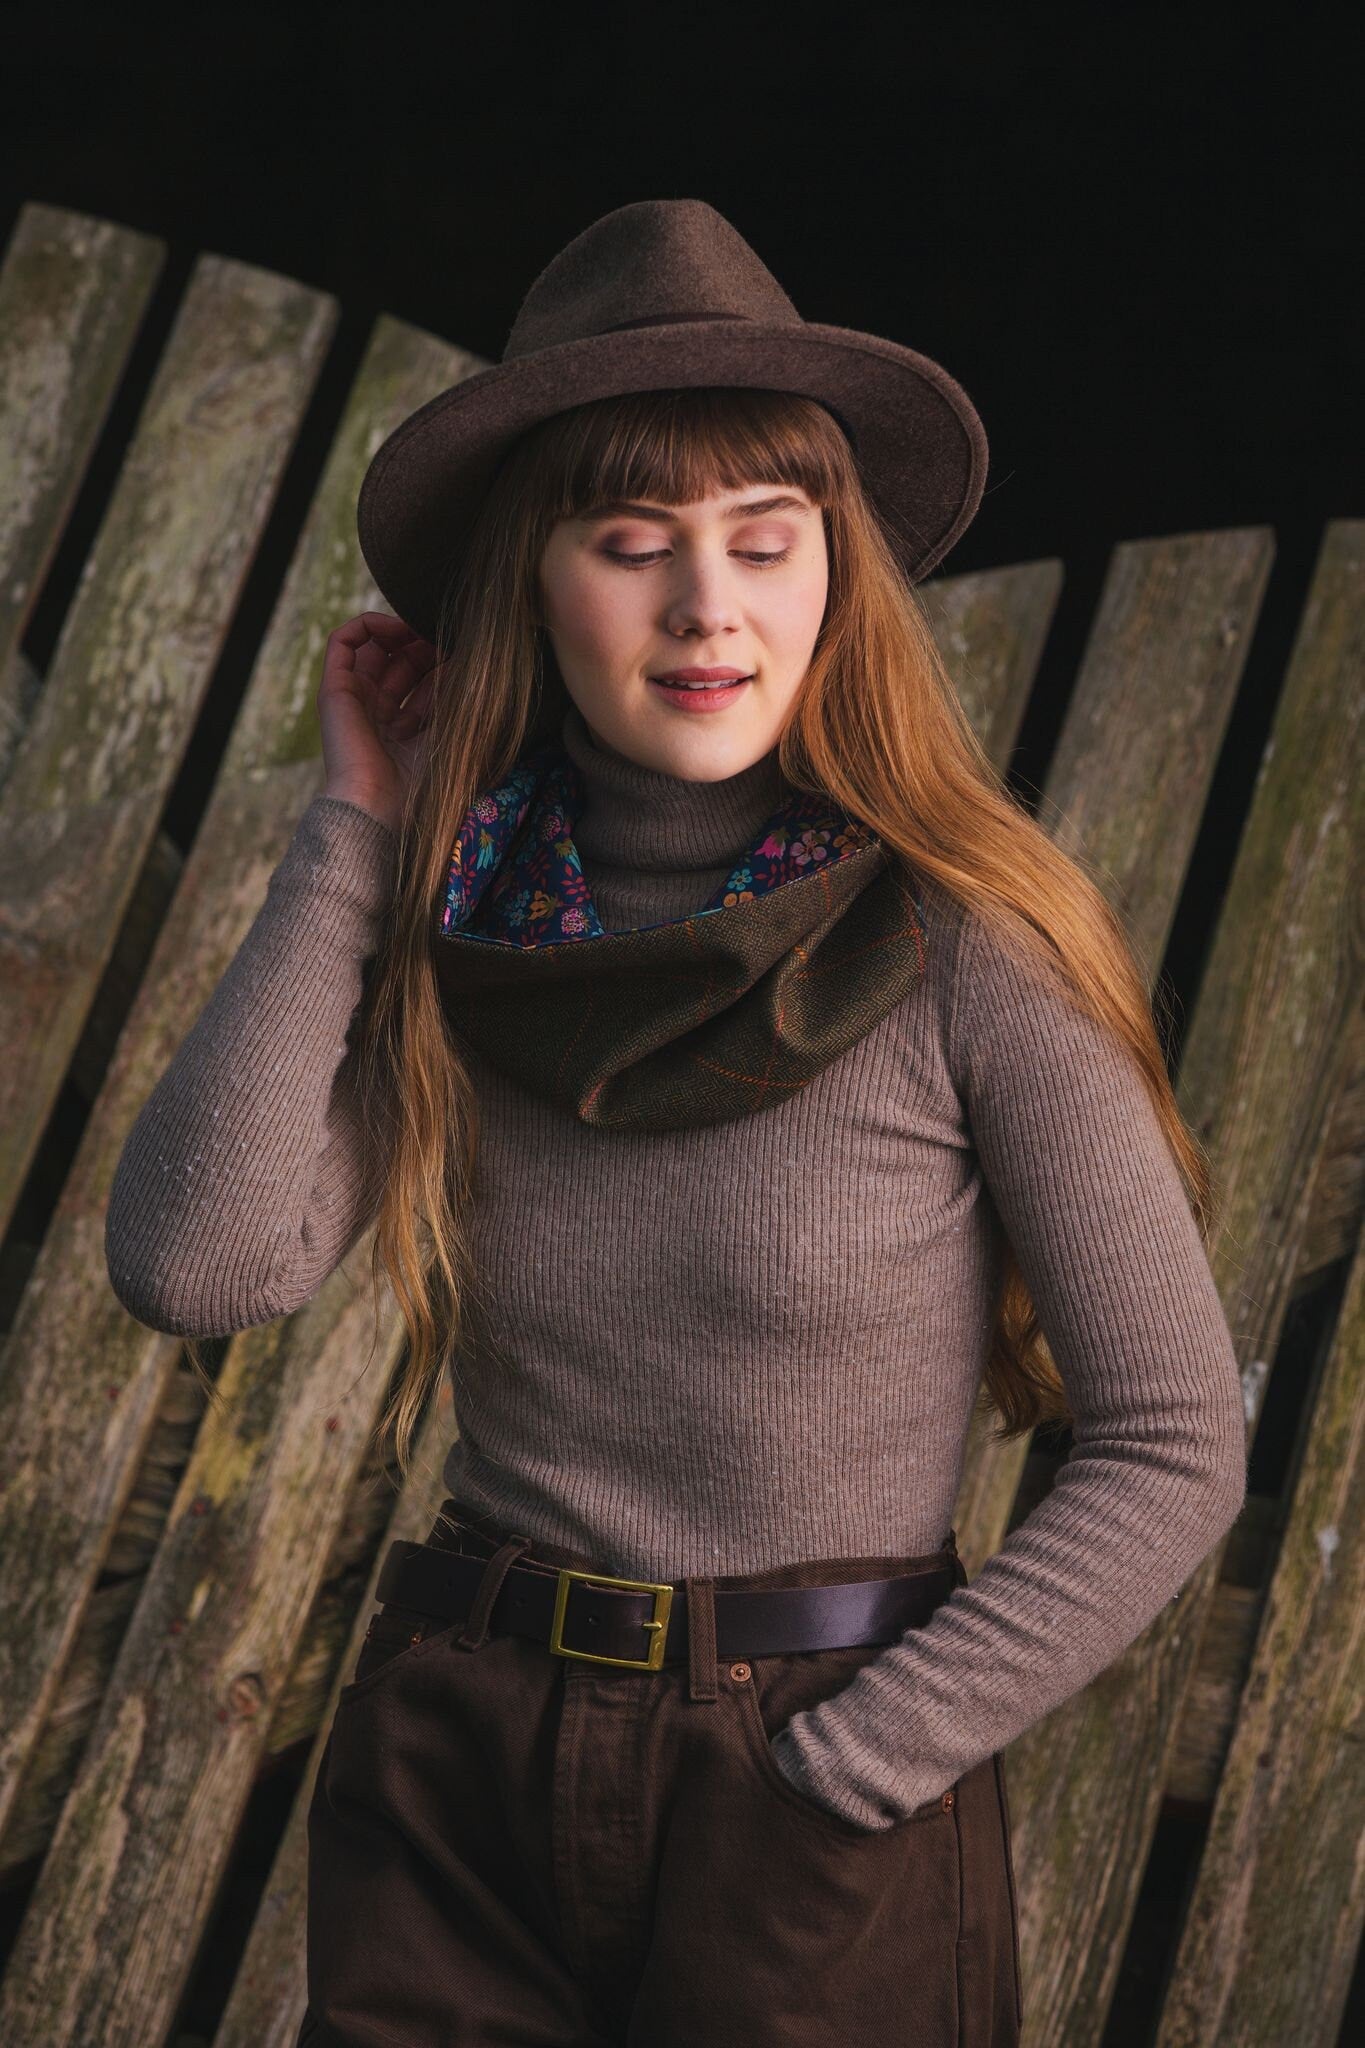 Dark Brown Lovat Tweed Cowl lined with Liberty Fabrics